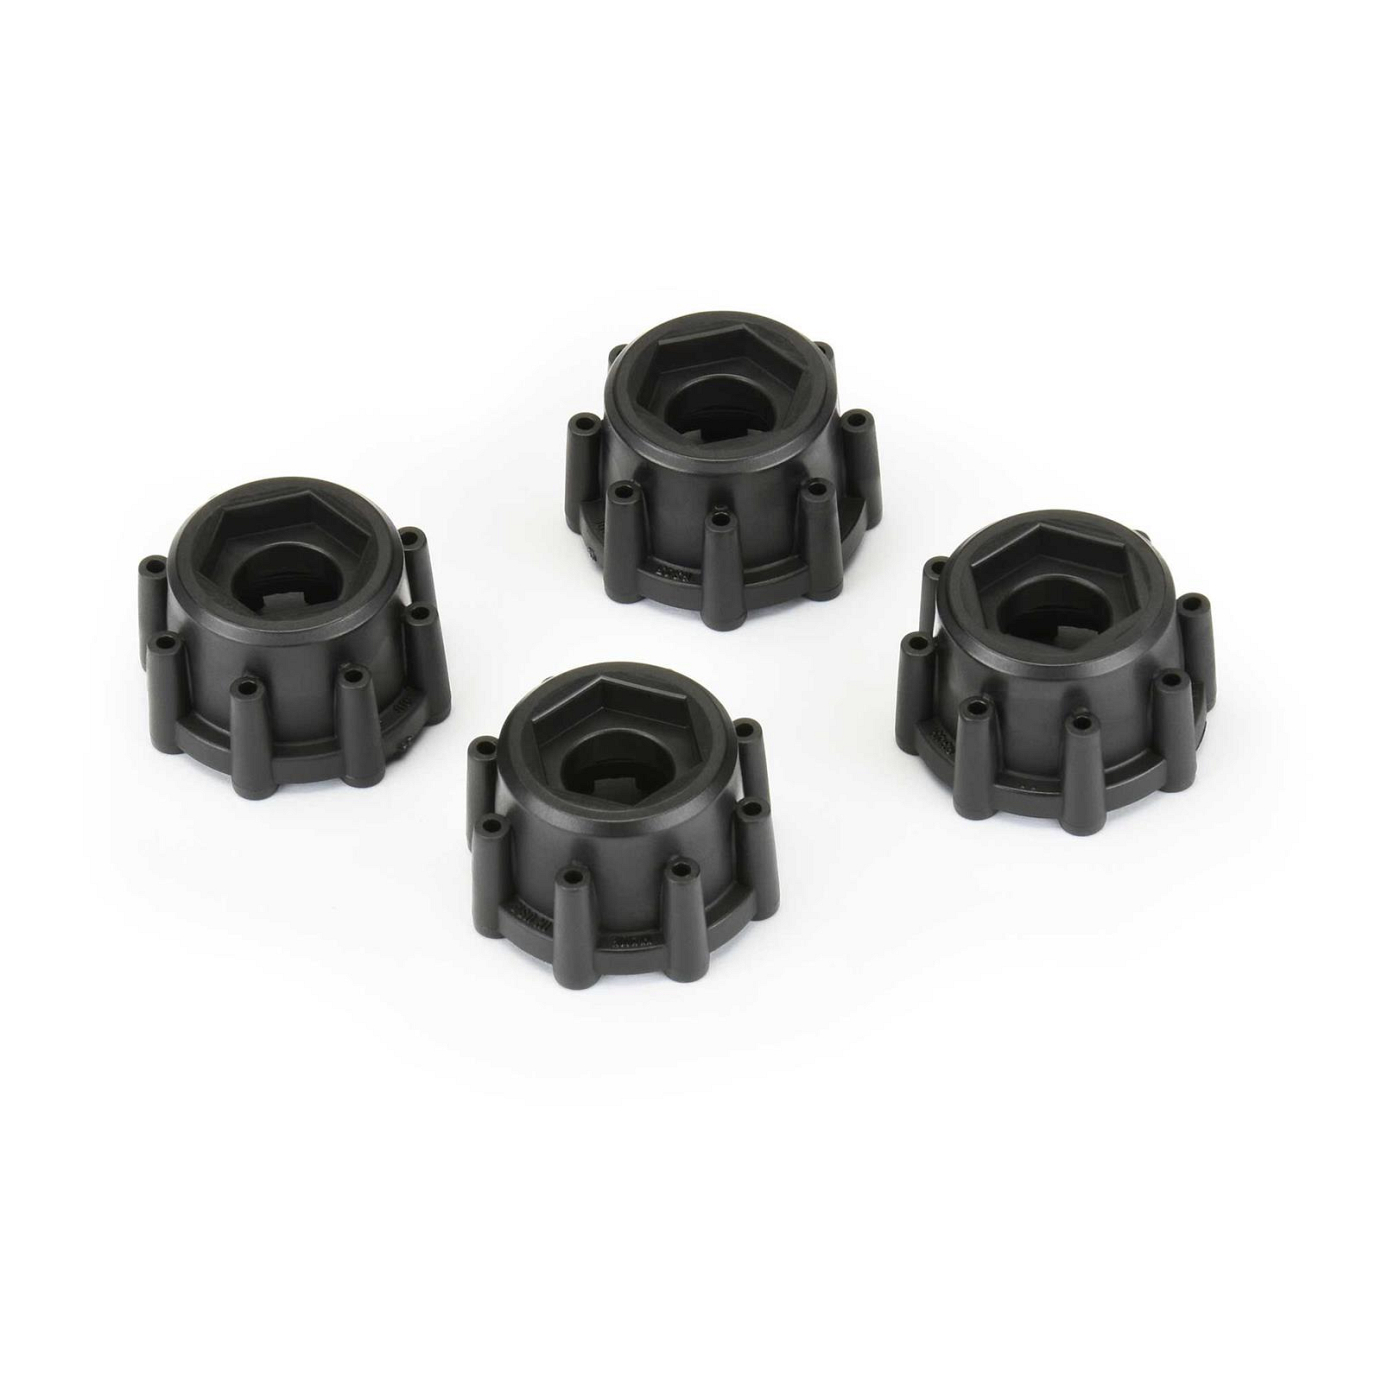 Proline 8x32 to 17mm Hex Adapters for 8x32 3.8in Wheels, PR6345-